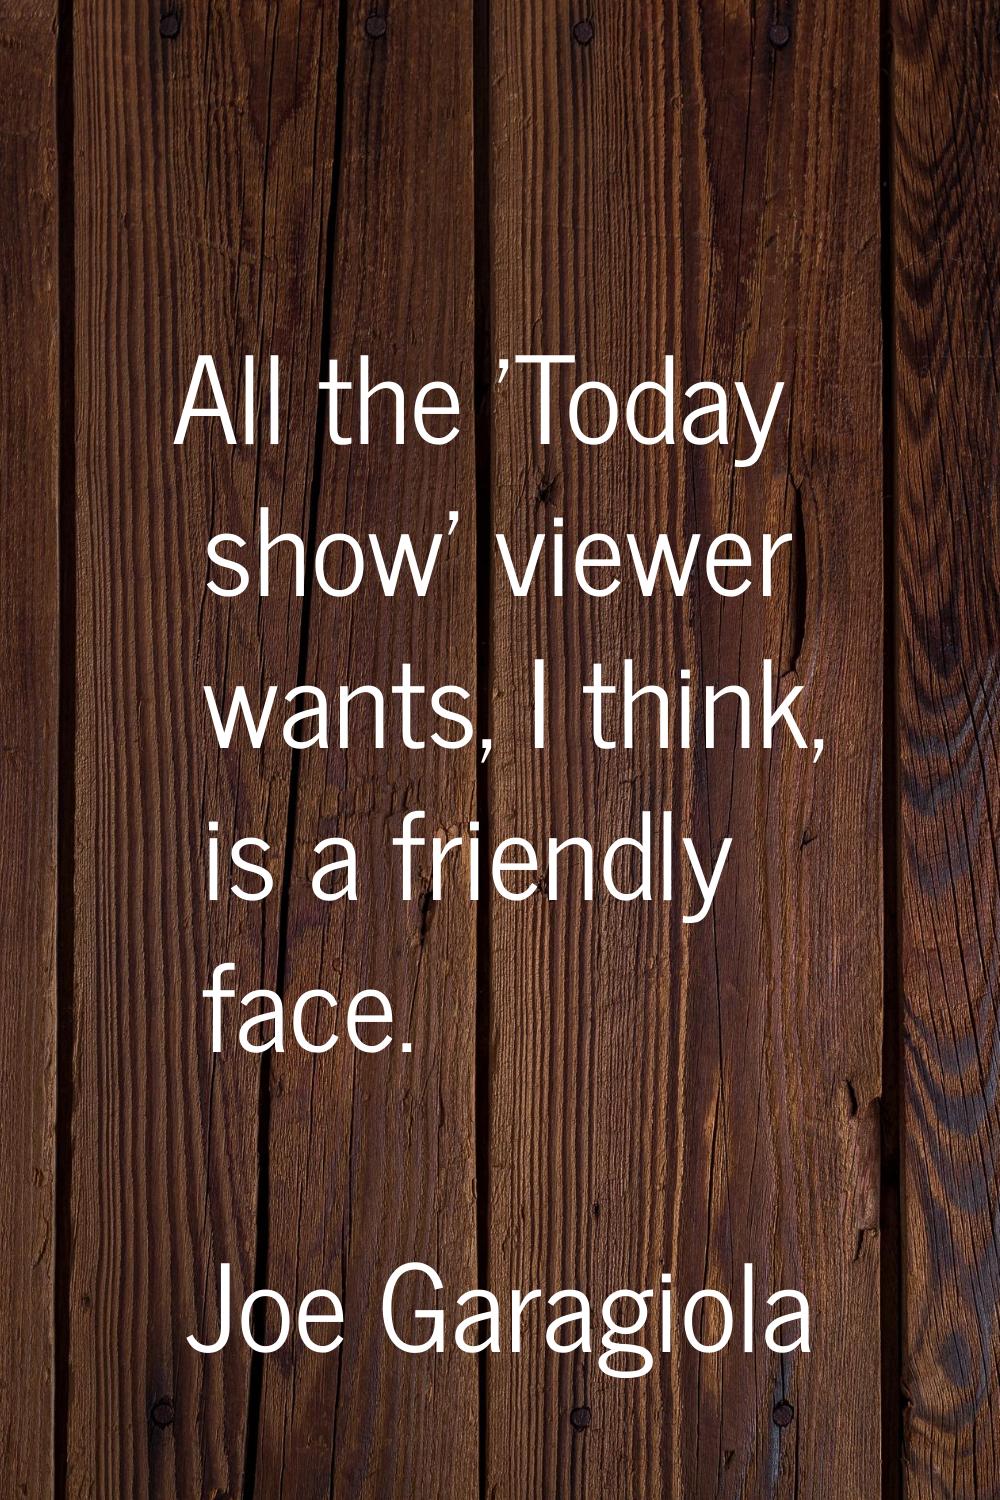 All the 'Today show' viewer wants, I think, is a friendly face.